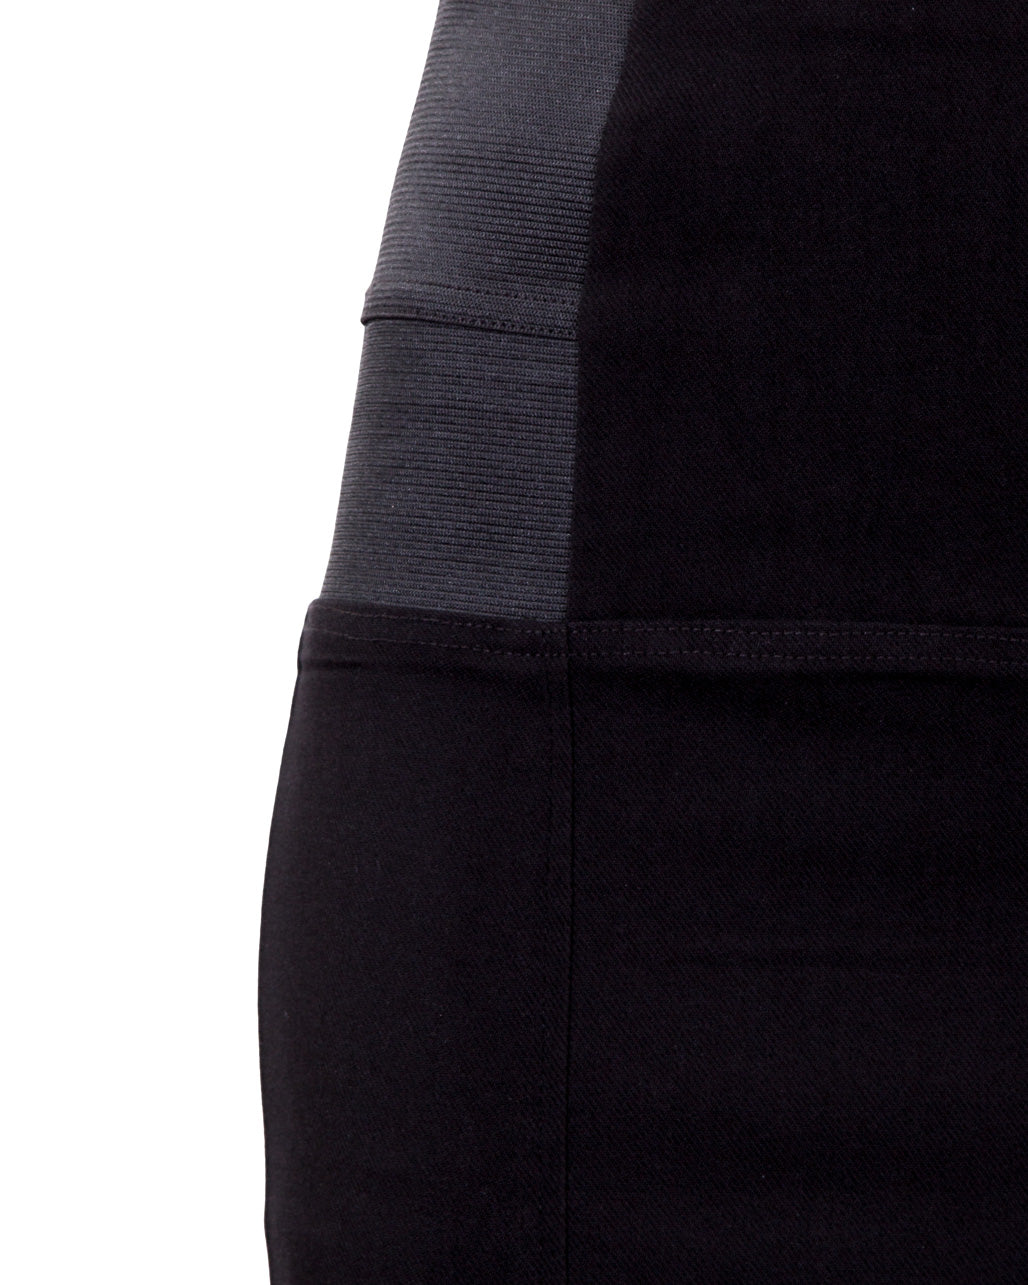 Black high waisted stretch skirt showing side elastic detail